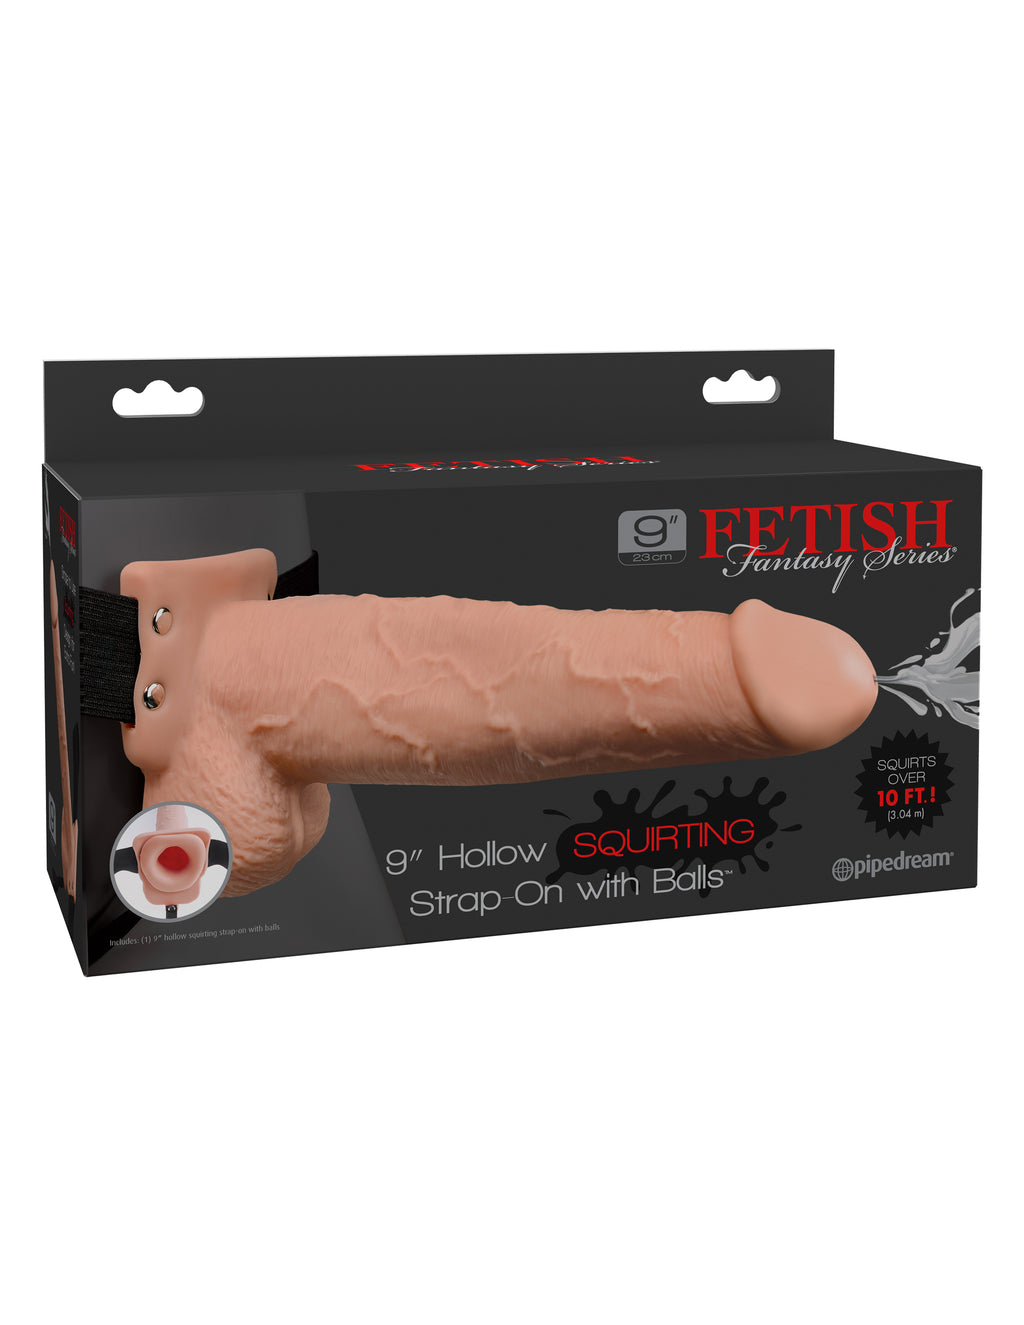 Fetish Fantasy Series 9" Hollow Squirting Strap-on With Balls - Flesh